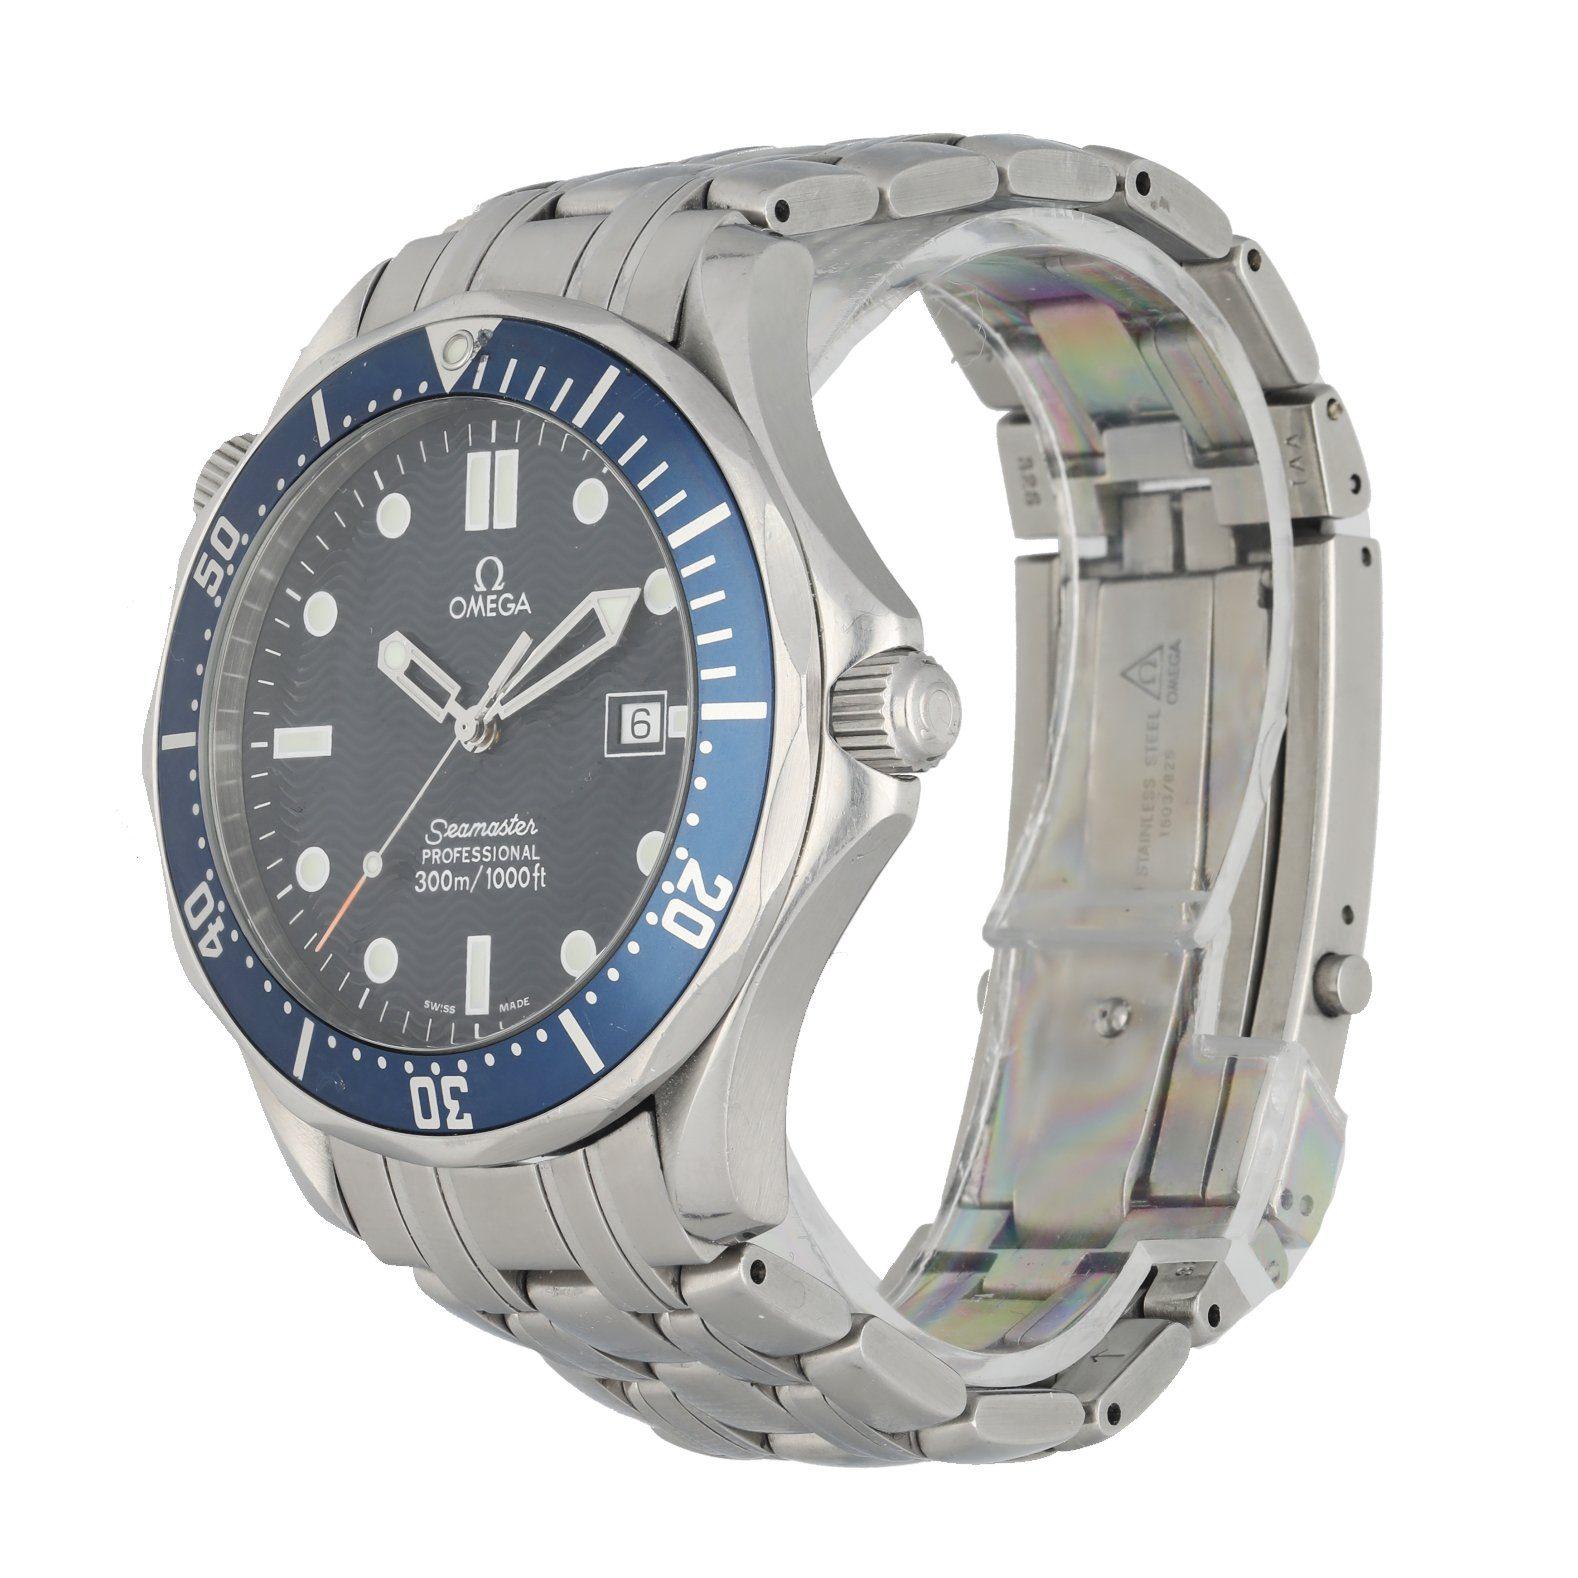 Omega Seamaster Professional 2541.80.00 Men Watch. 41mm Stainless Steel case. Stainless Steel Unidirectional bezel. Blue dial with Luminous Steel hands and dot hour markers. Minute markers on the outer dial. Date display at the 3 o'clock position.